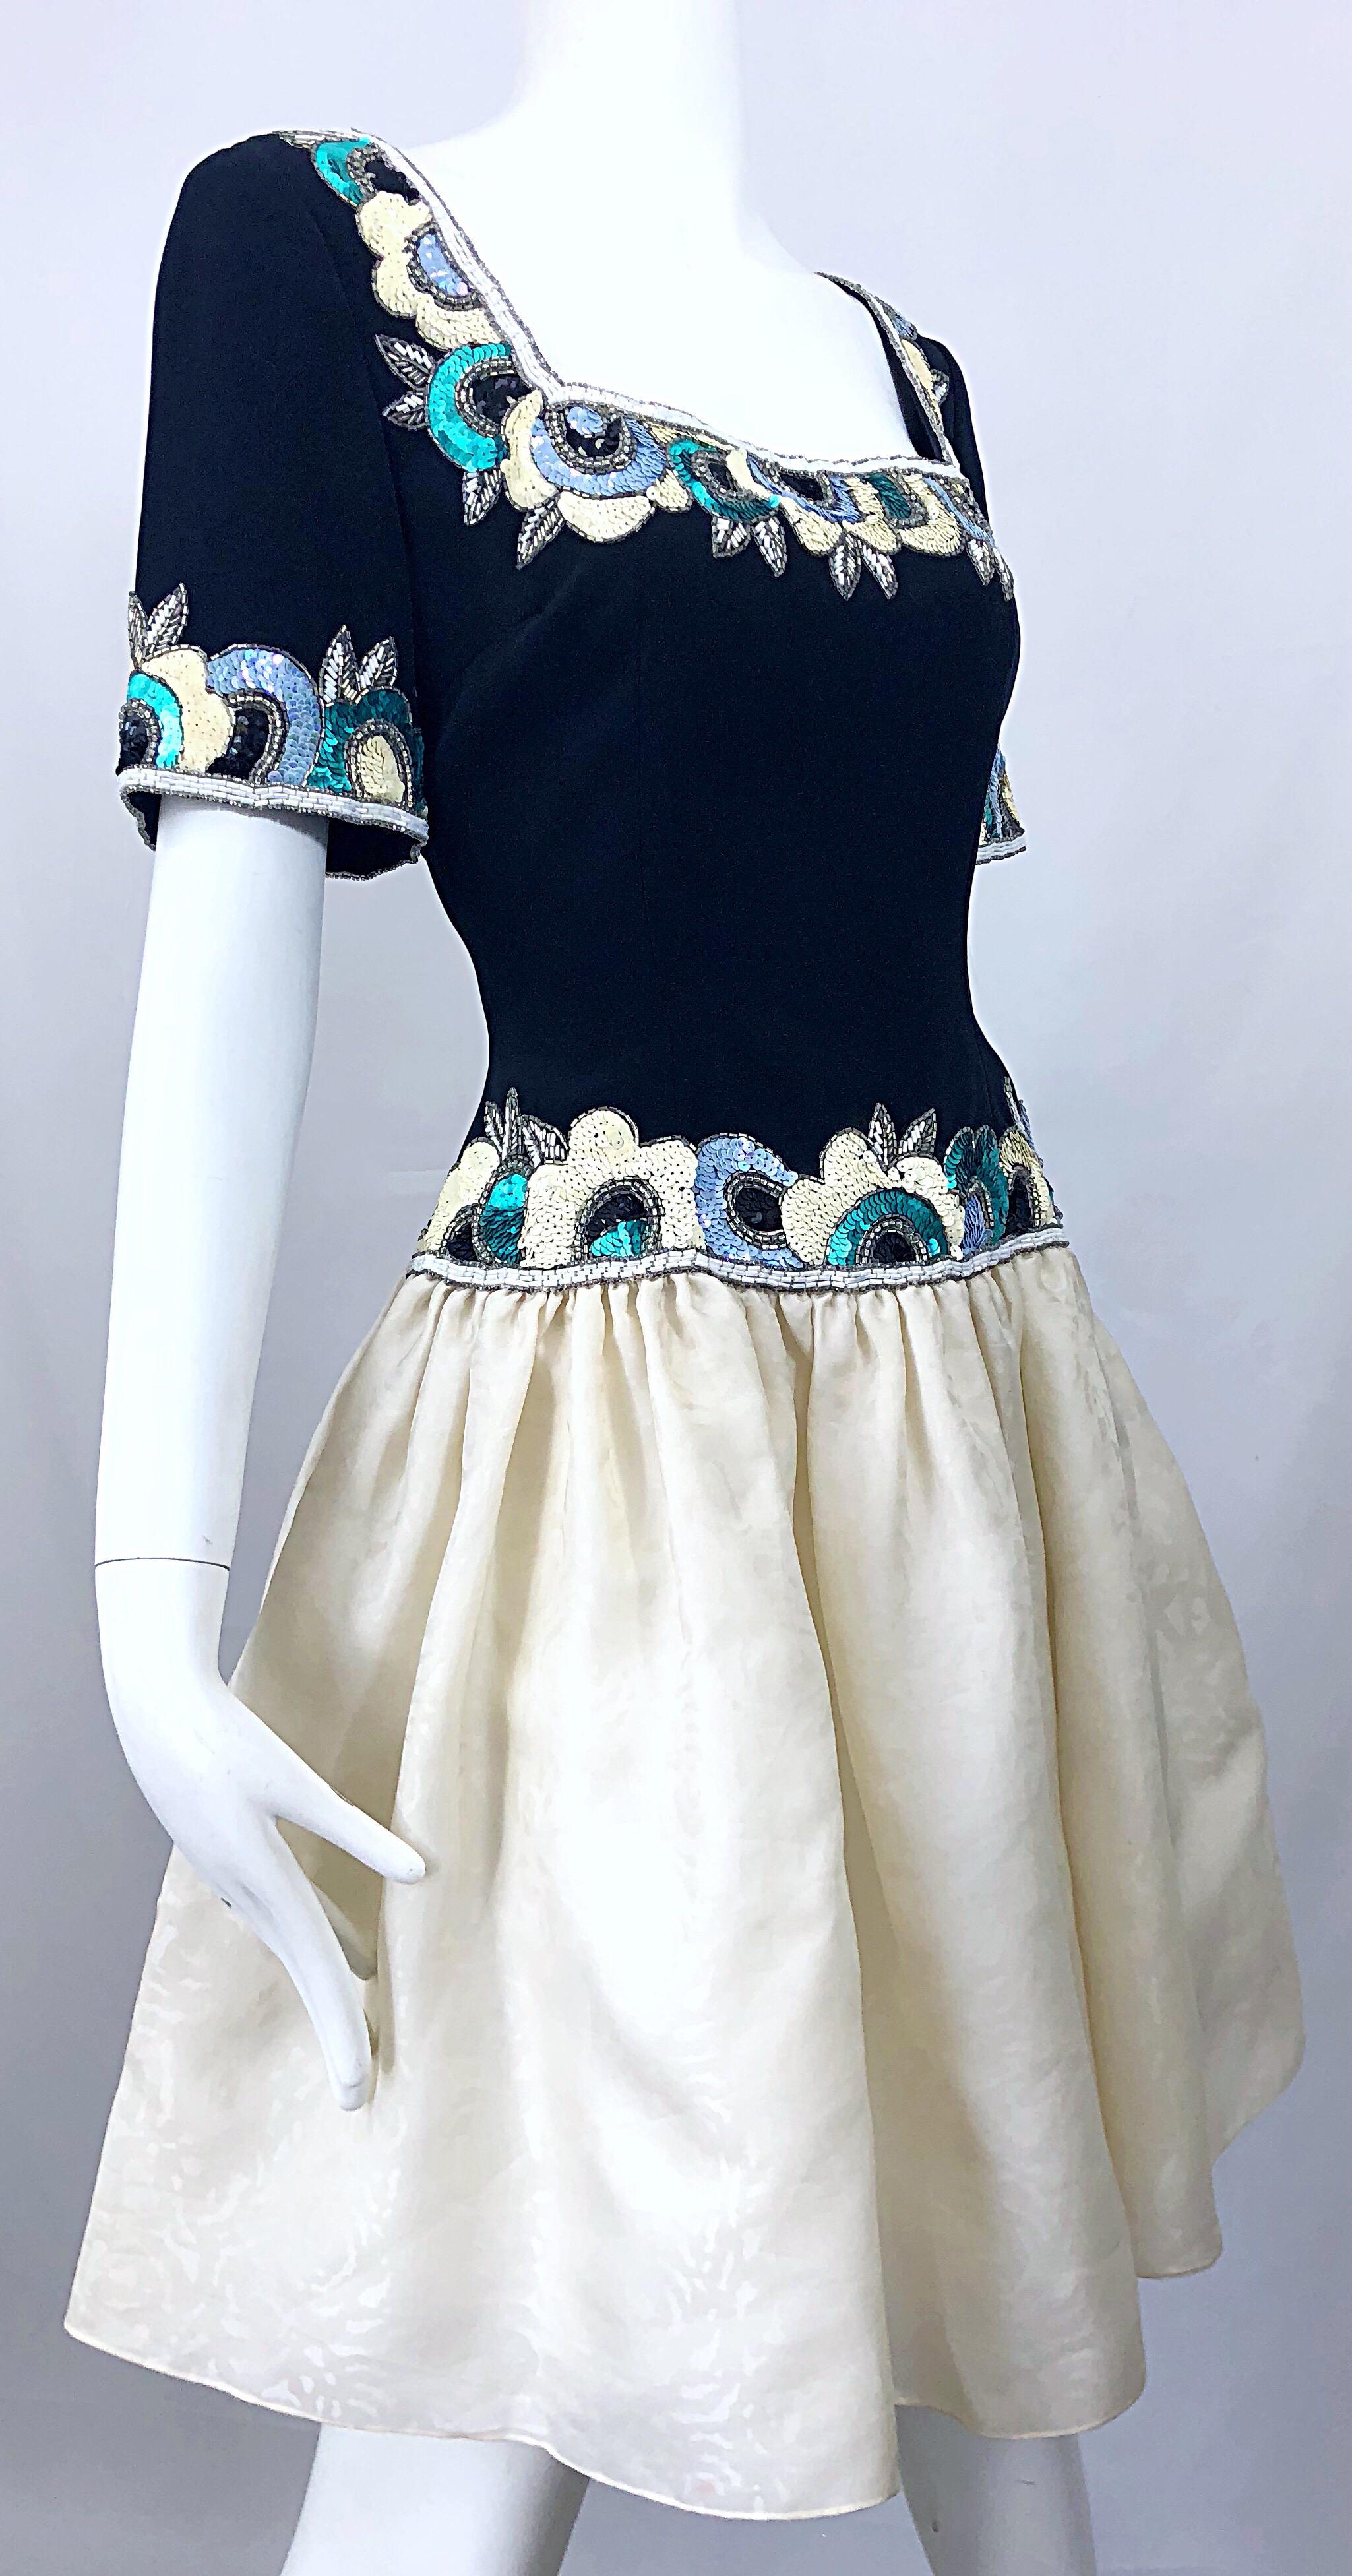 Vintage Bob Mackie 1990s Size 6 Black, White and Blue Silk Fit n' Flare Dress For Sale 5